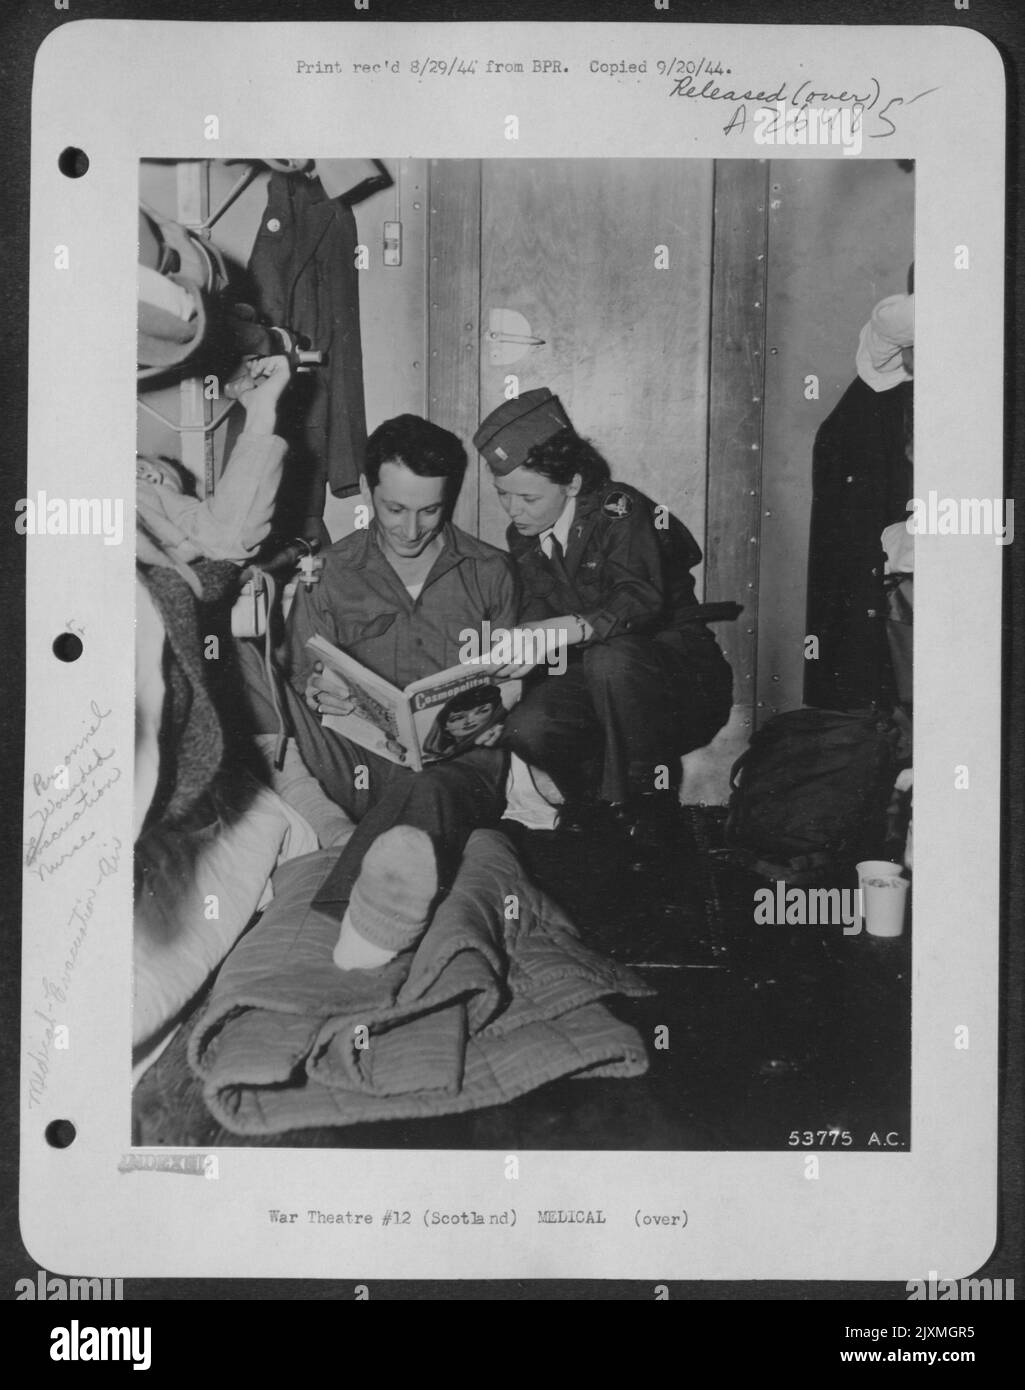 Pvt. Joseph Mencas, of Farmington, W.Va., scans a magazine during this flight back to the U.S. aboard an ATC plane. Lt. Geraldine E. Lyane of St. Paul, Minn., the fligth nurse in charge of the wounded men, propped up Pvt. Mencas' injured foot on a Stock Photo